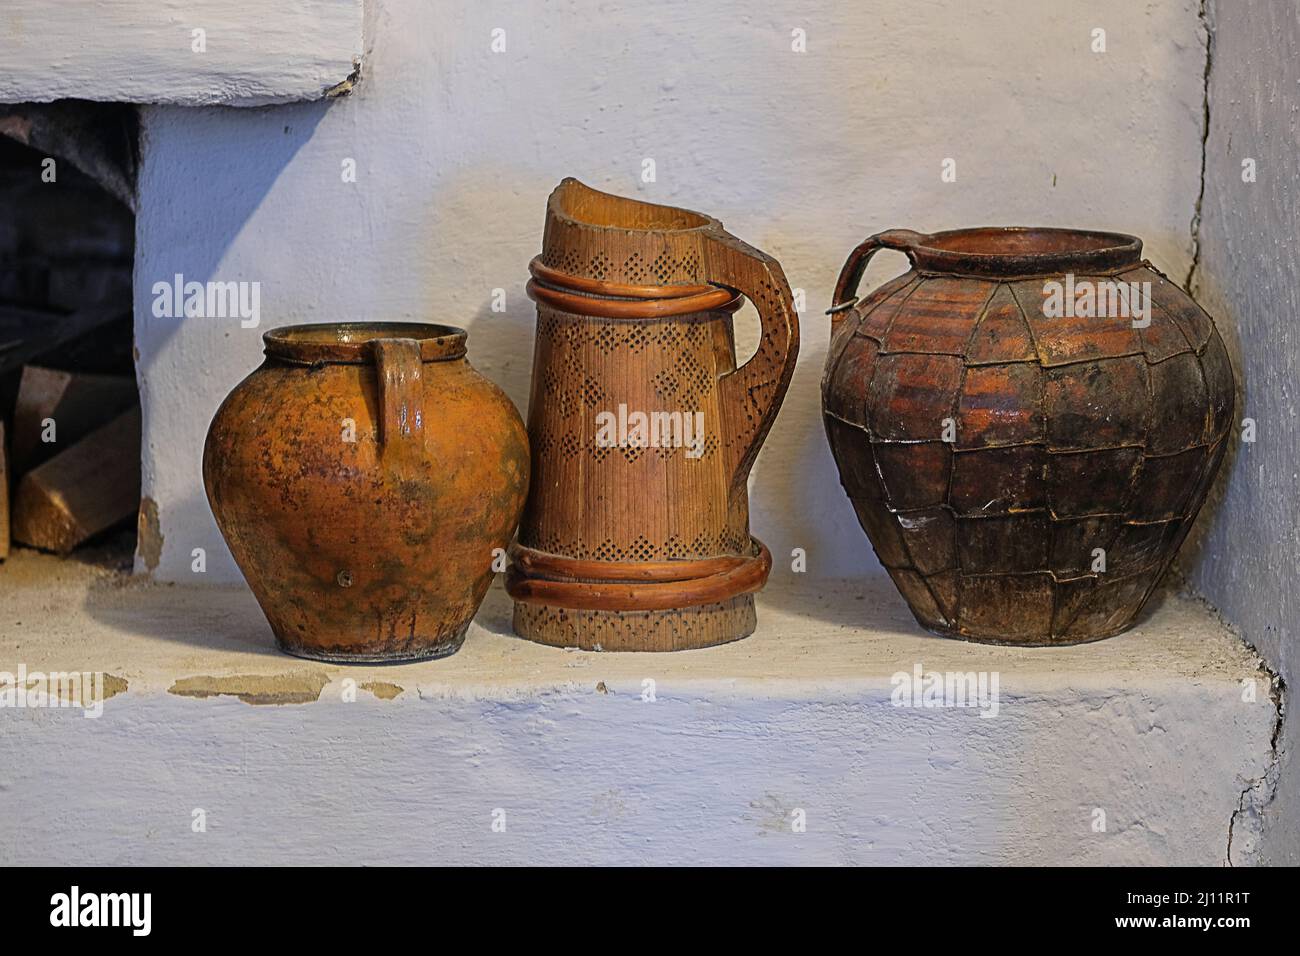 https://c8.alamy.com/comp/2J11R1T/clay-traditional-pot-in-vintage-style-ukrainian-cultural-national-style-installation-in-museums-of-traditional-rural-household-items-2J11R1T.jpg